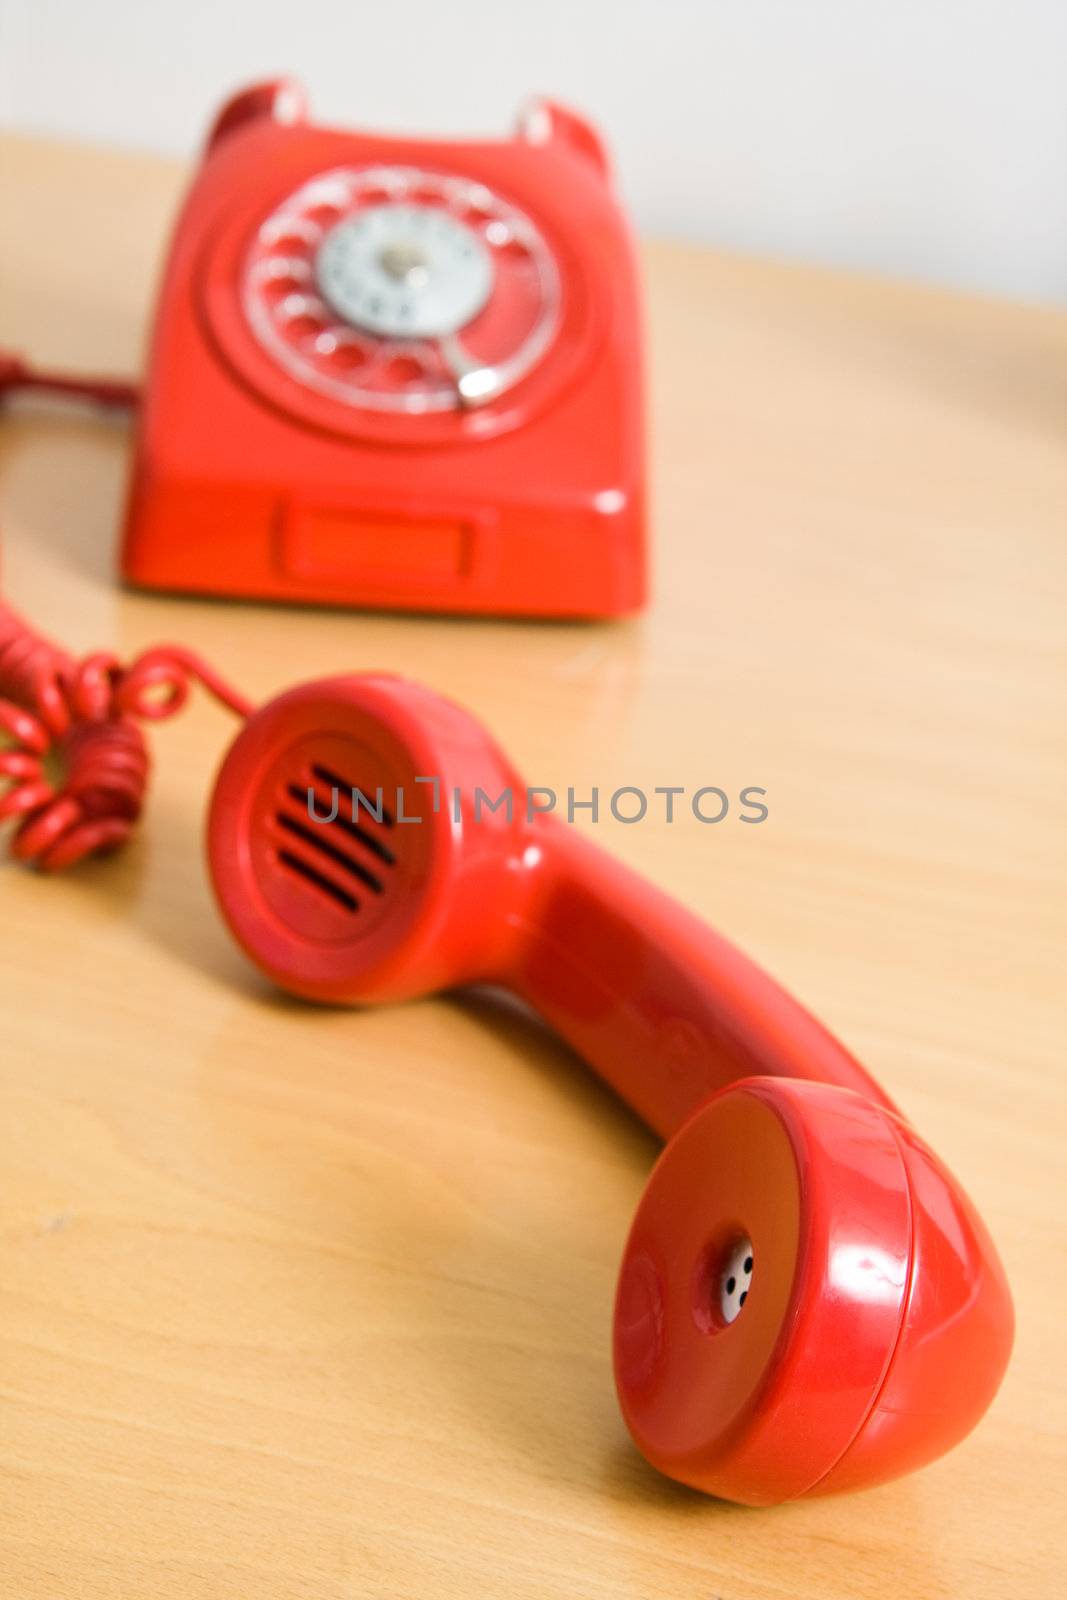 Vintage red telephone on wooden table